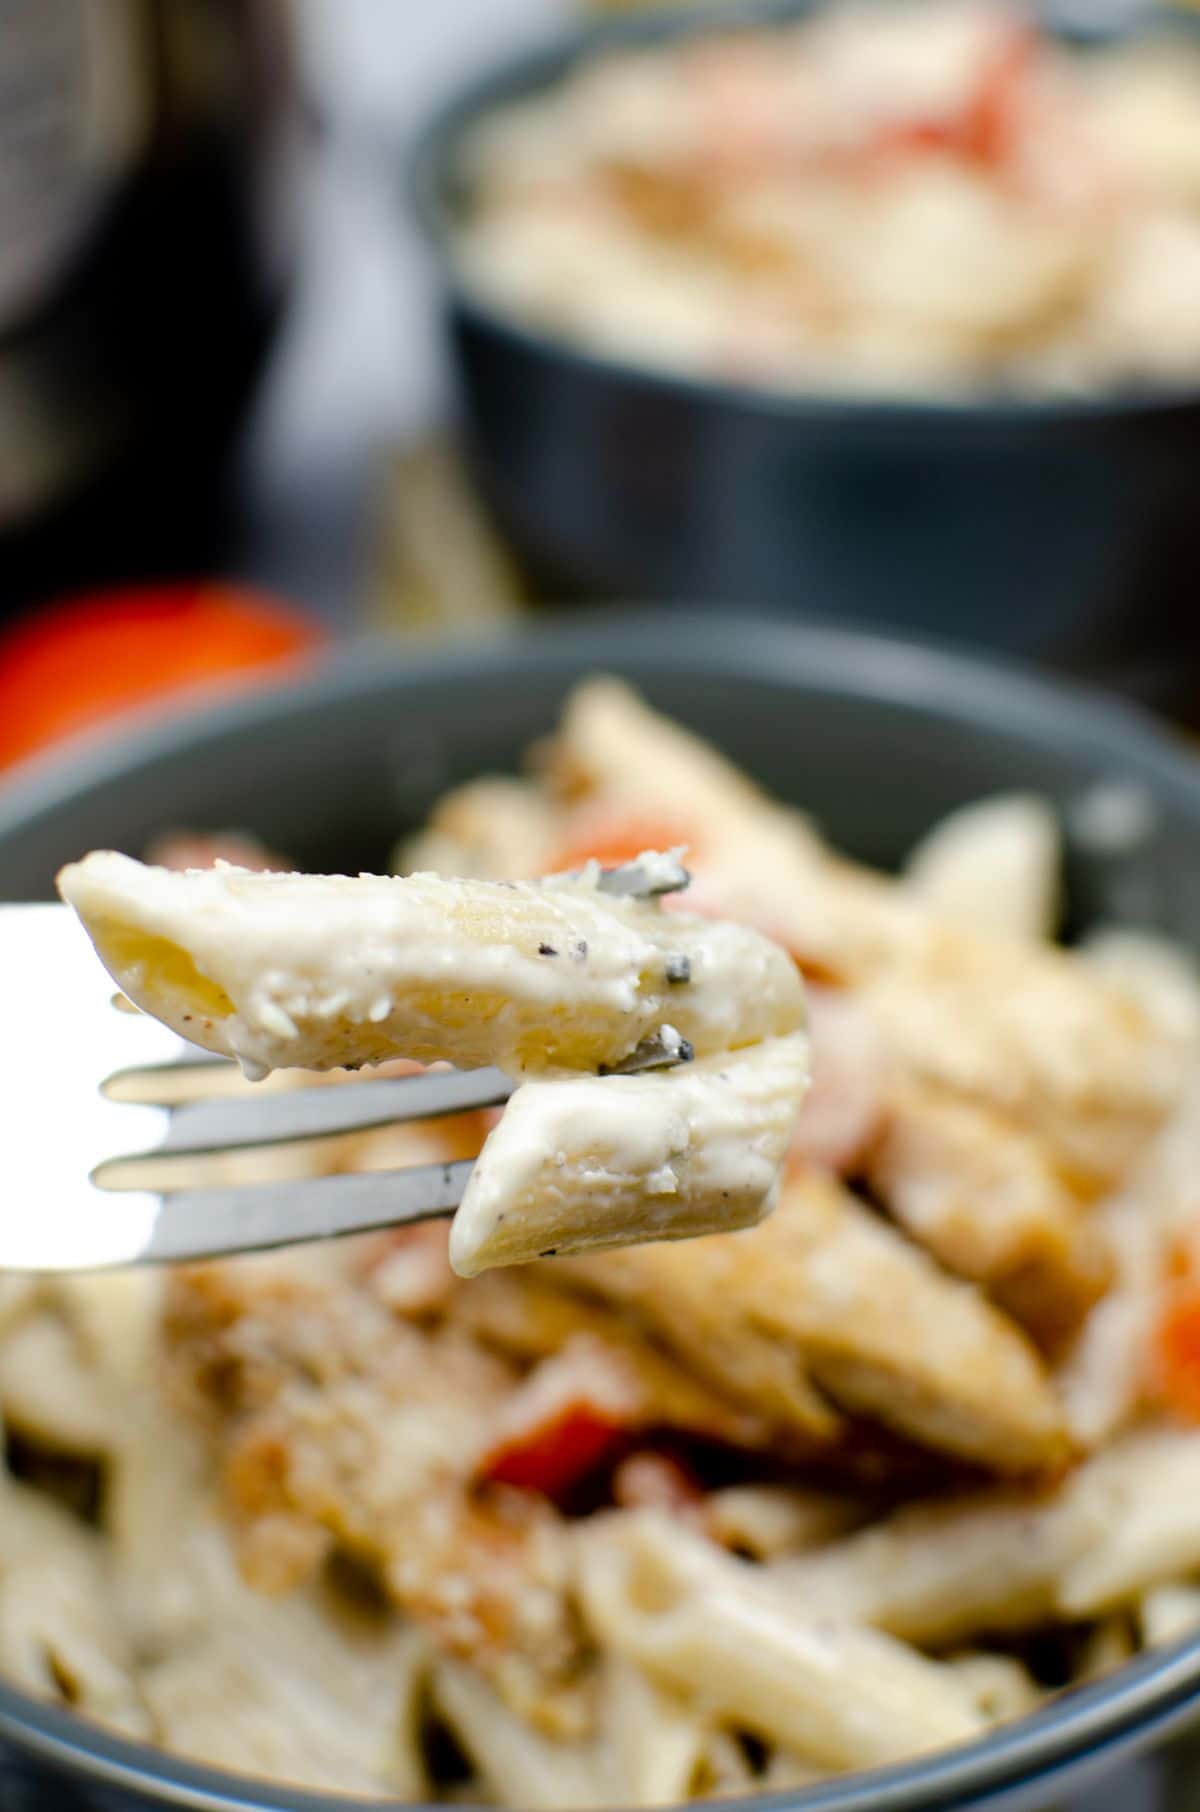 close up of A fork with 2 pieces of the pasta and the rest of the pasta in a bowl blurred in the background.